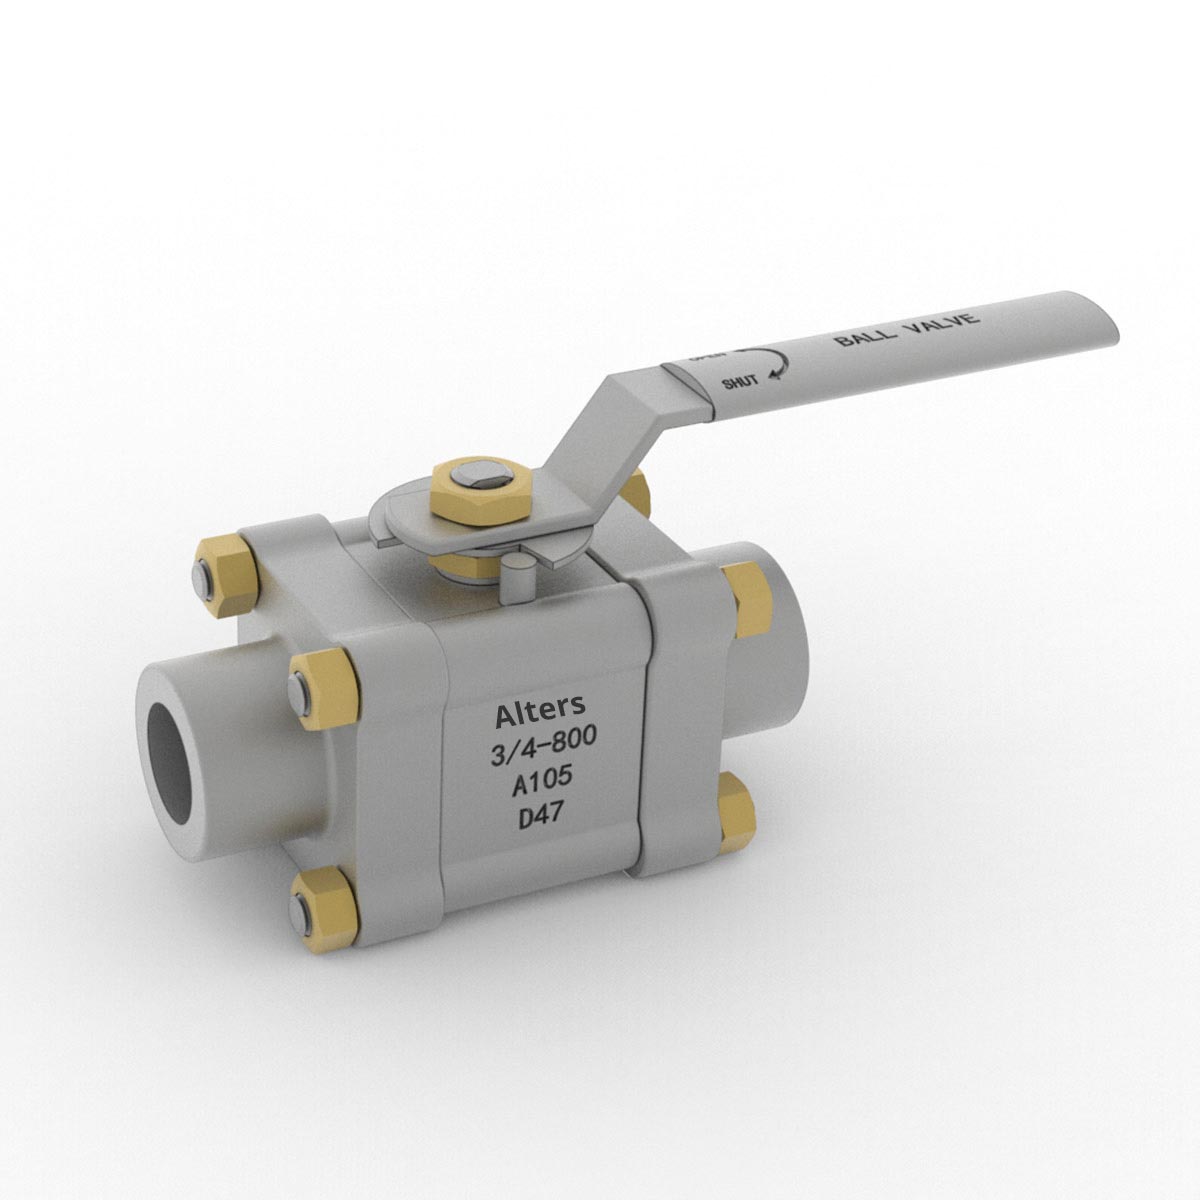 Floating Ball Valve SW BW FNPT from AlterValve with the company name and specifications.